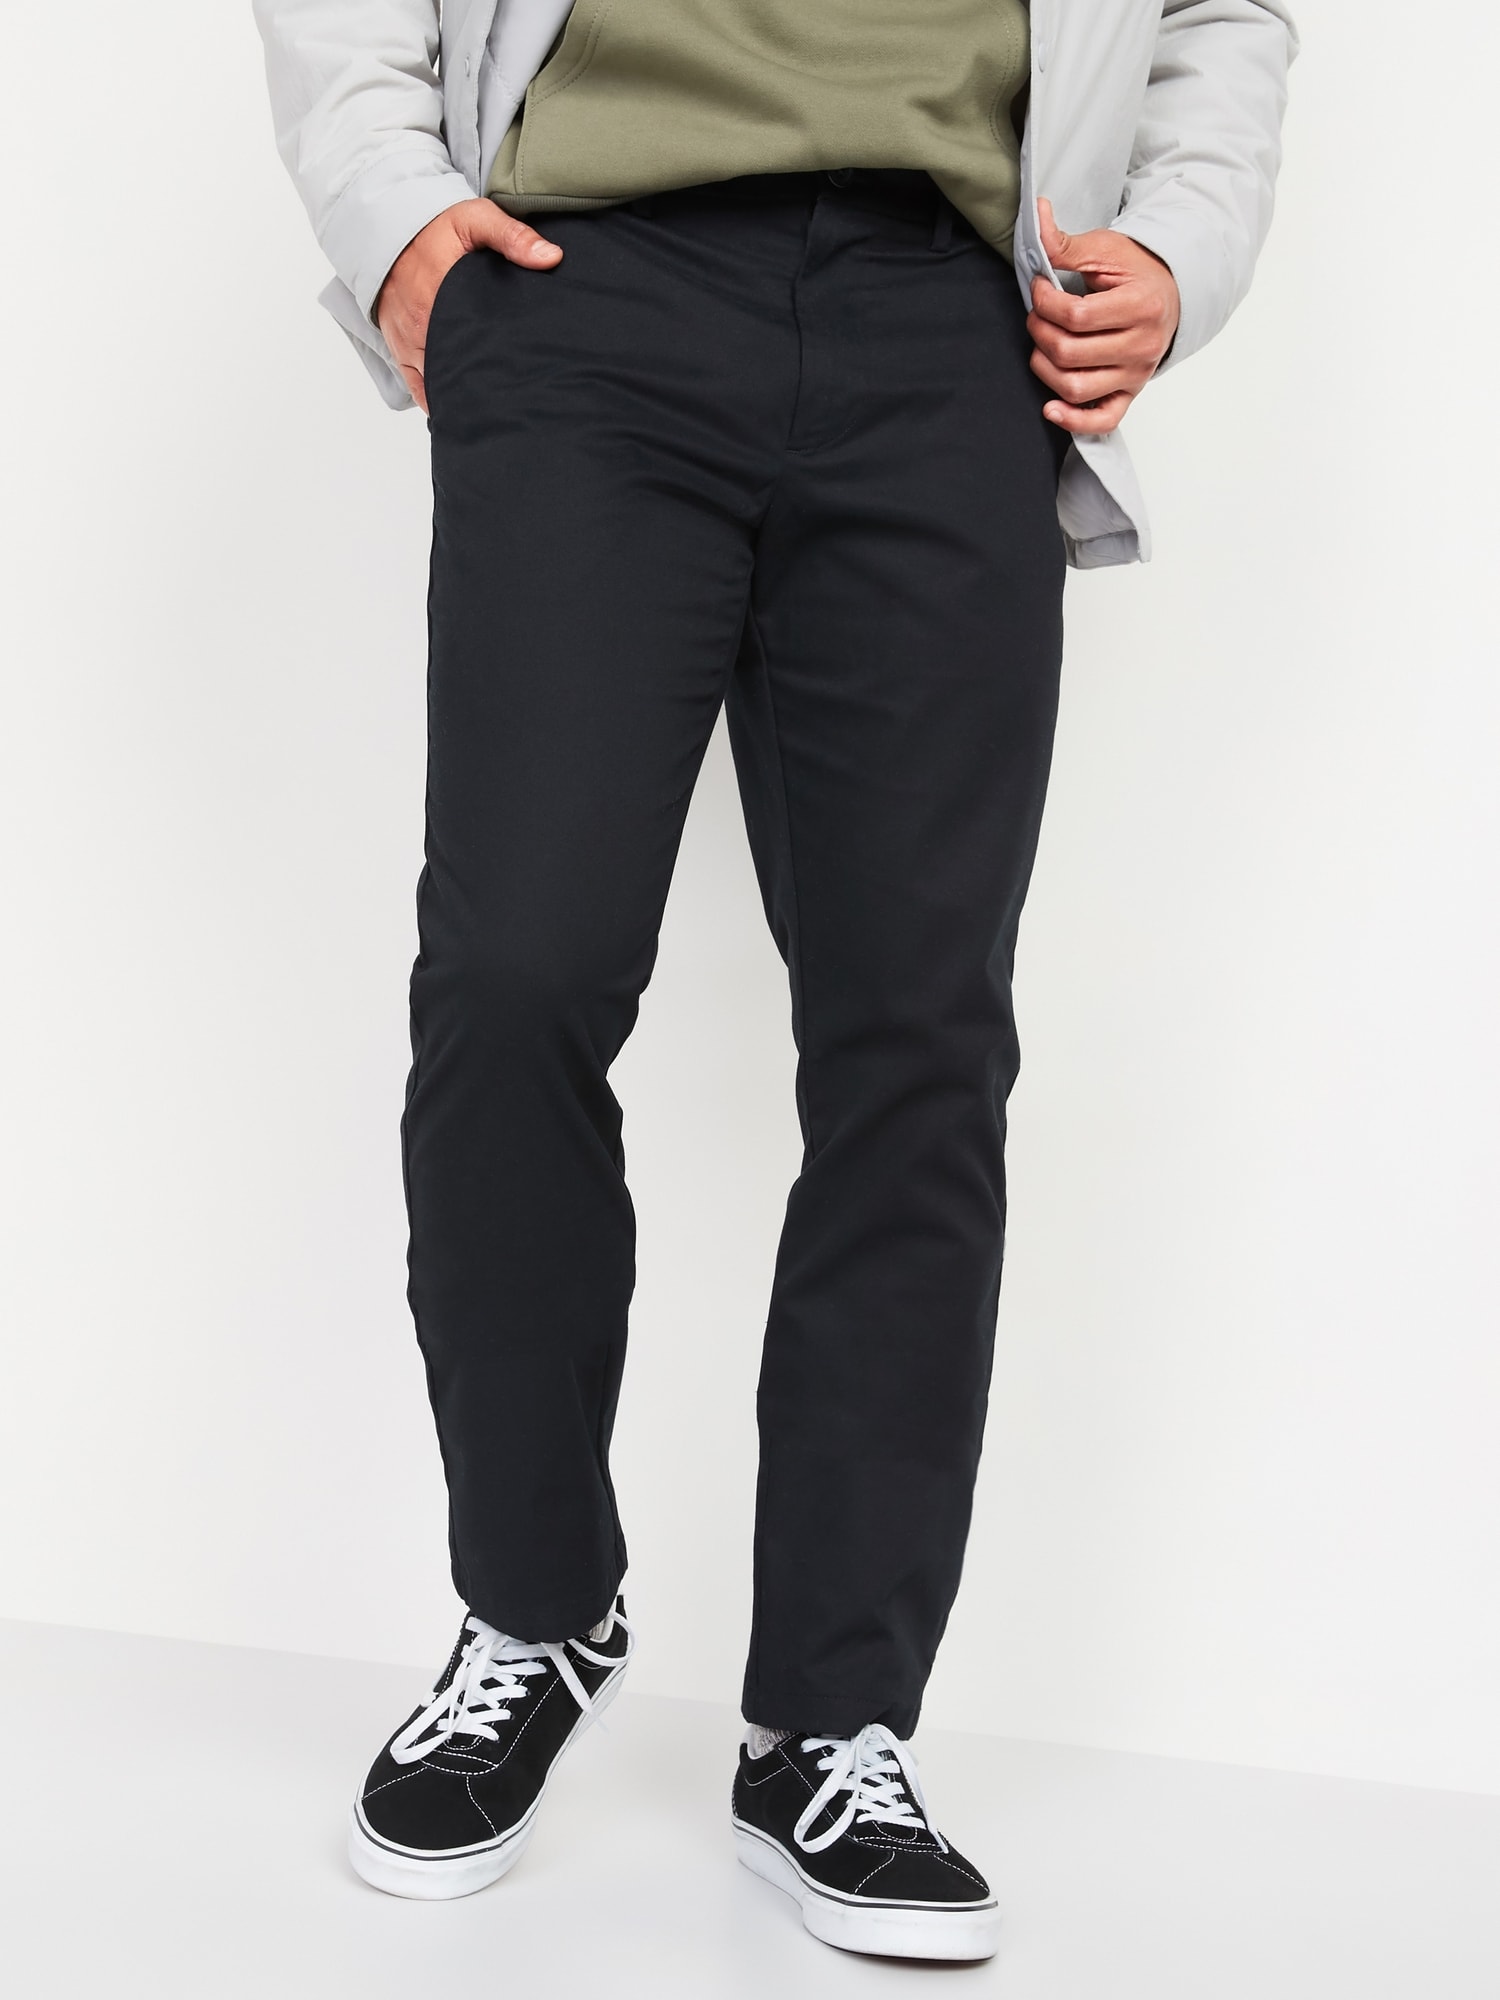 Old Navy Straight Ultimate Built-In Flex Chino Pants black. 1